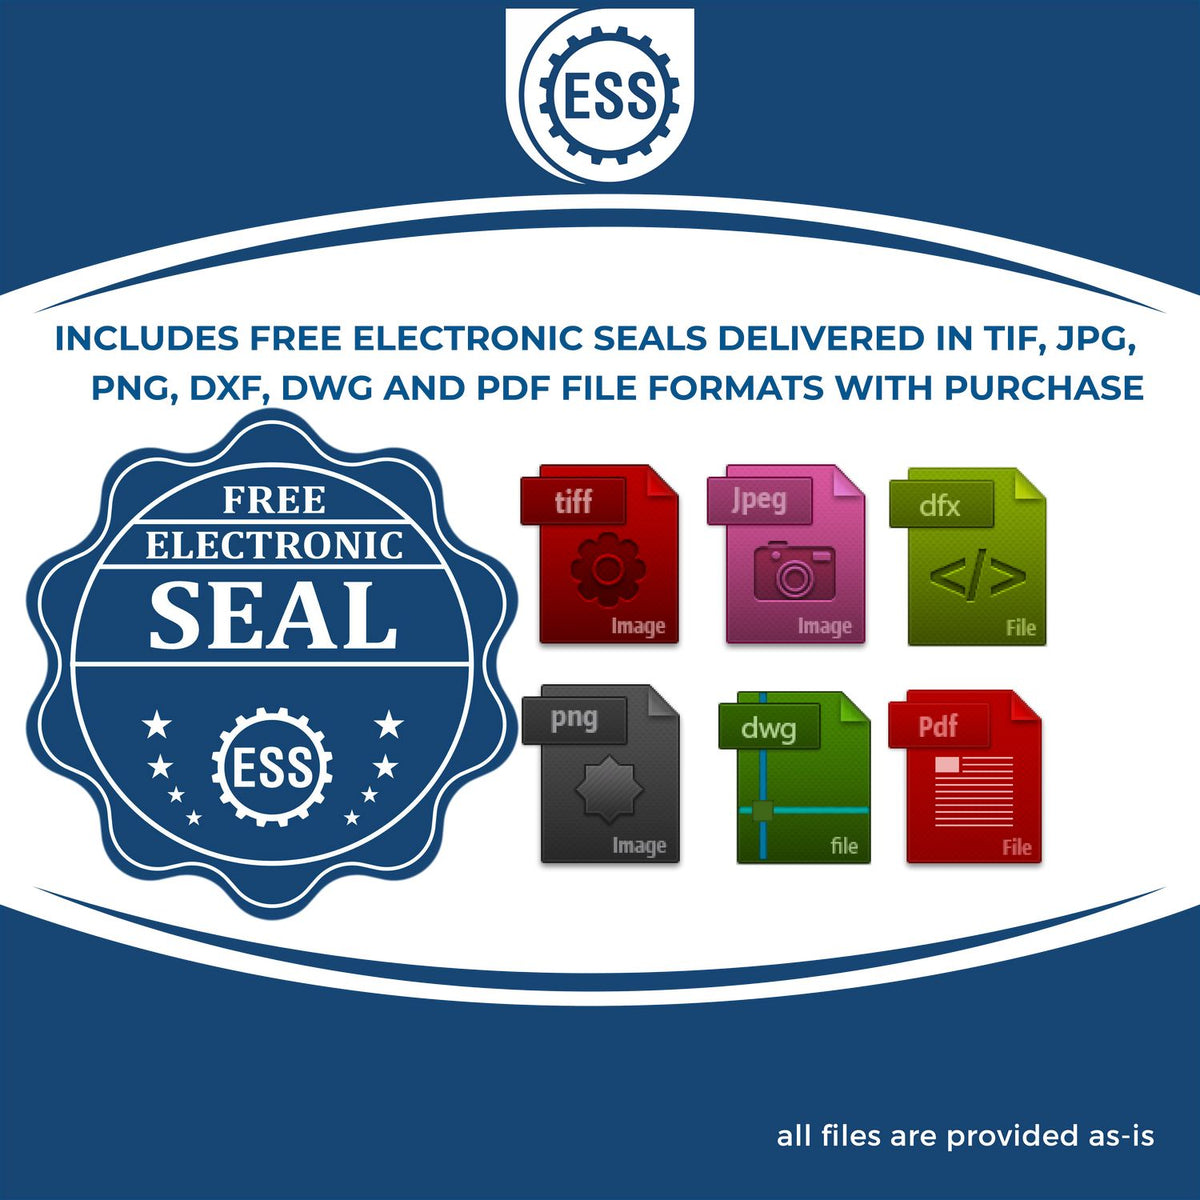 An infographic for the free electronic seal for the Nebraska Professional Geologist Seal Stamp illustrating the different file type icons such as DXF, DWG, TIF, JPG and PNG.